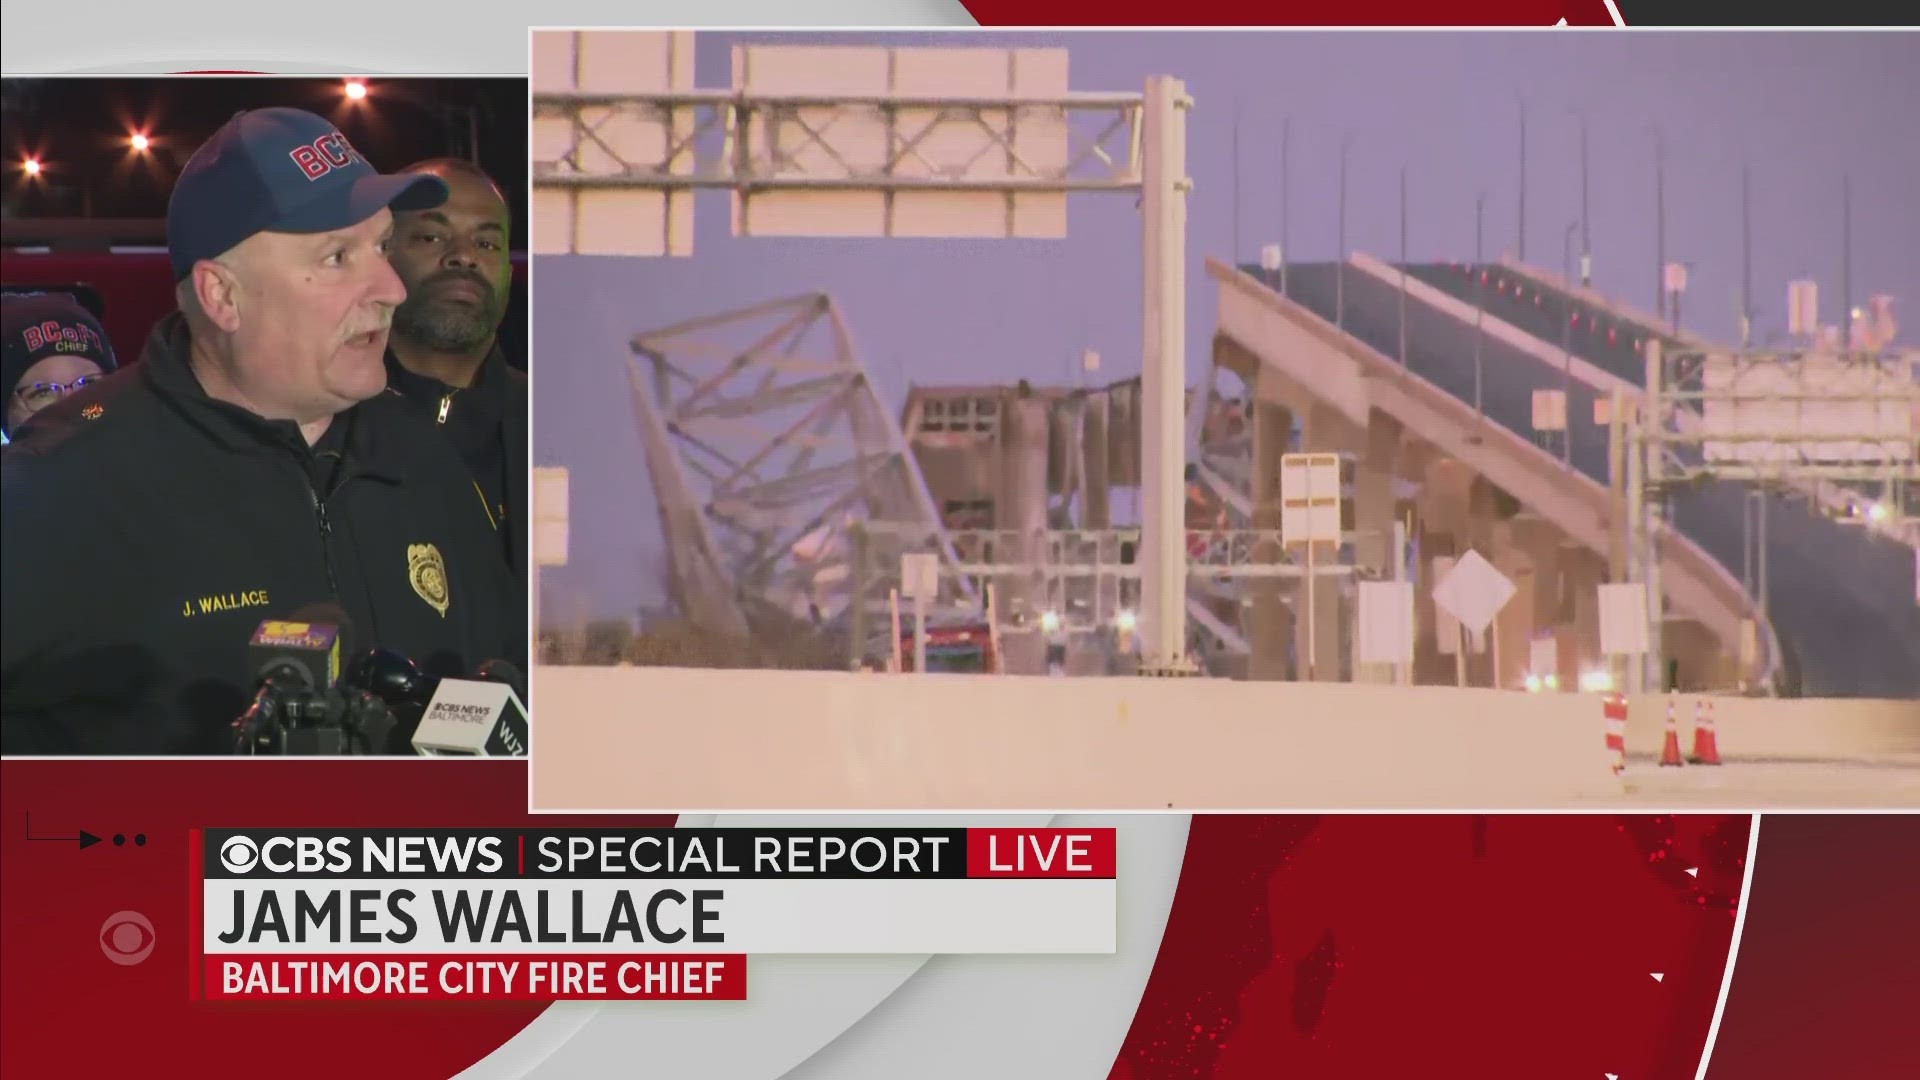 Ship hits a bridge in Baltimore causing it to collapse, a search and rescue effort is underway.